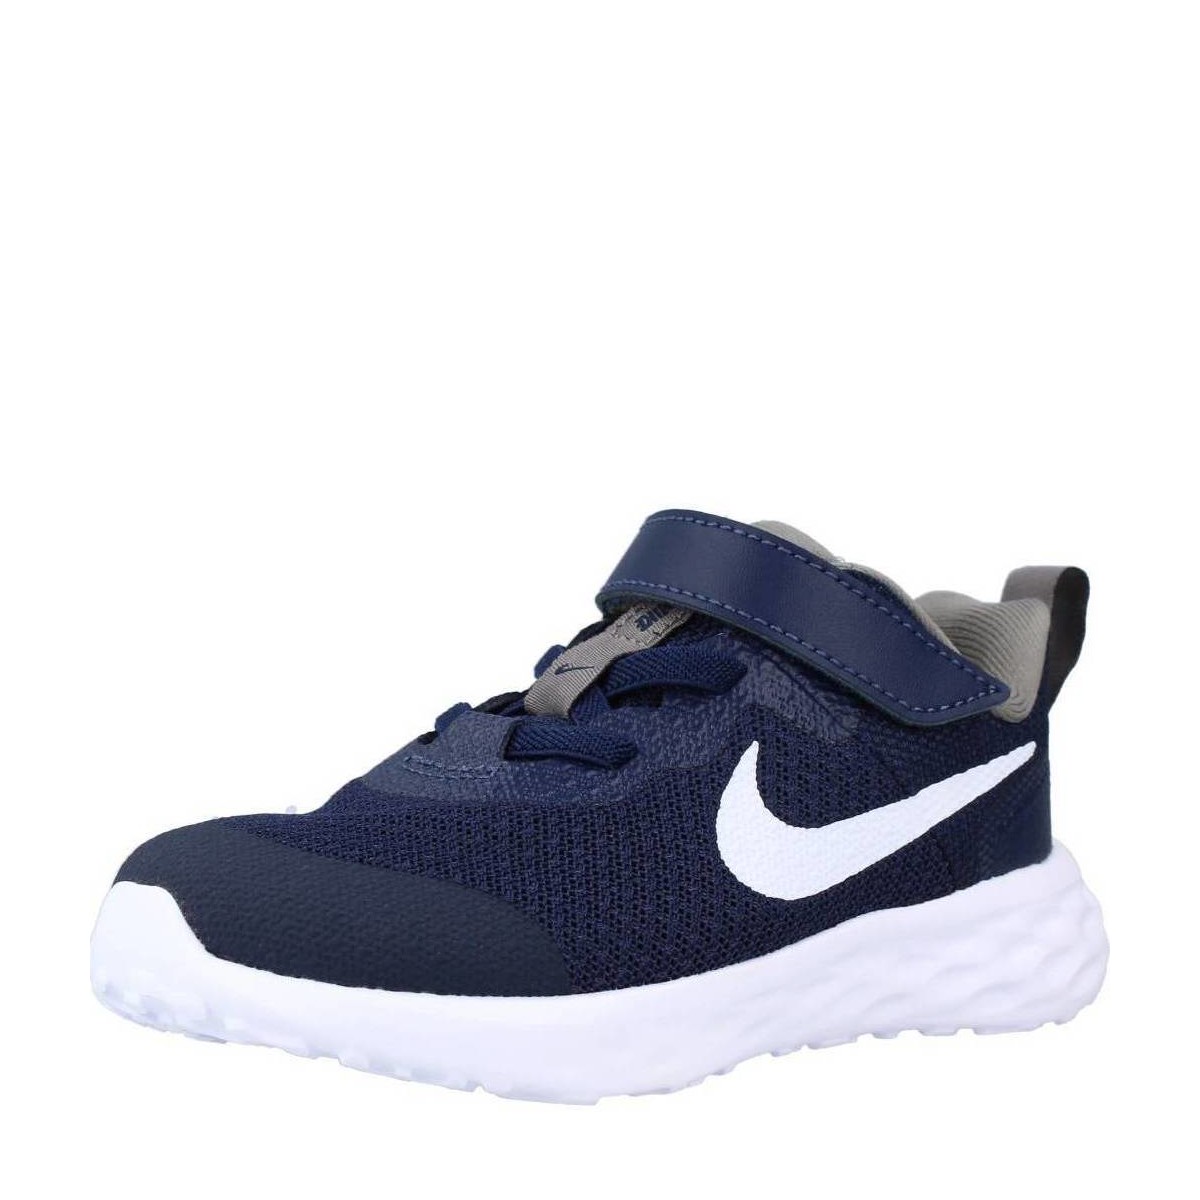 Nike REVOLUTION 6 BABY TODDL 23245404 1200 A